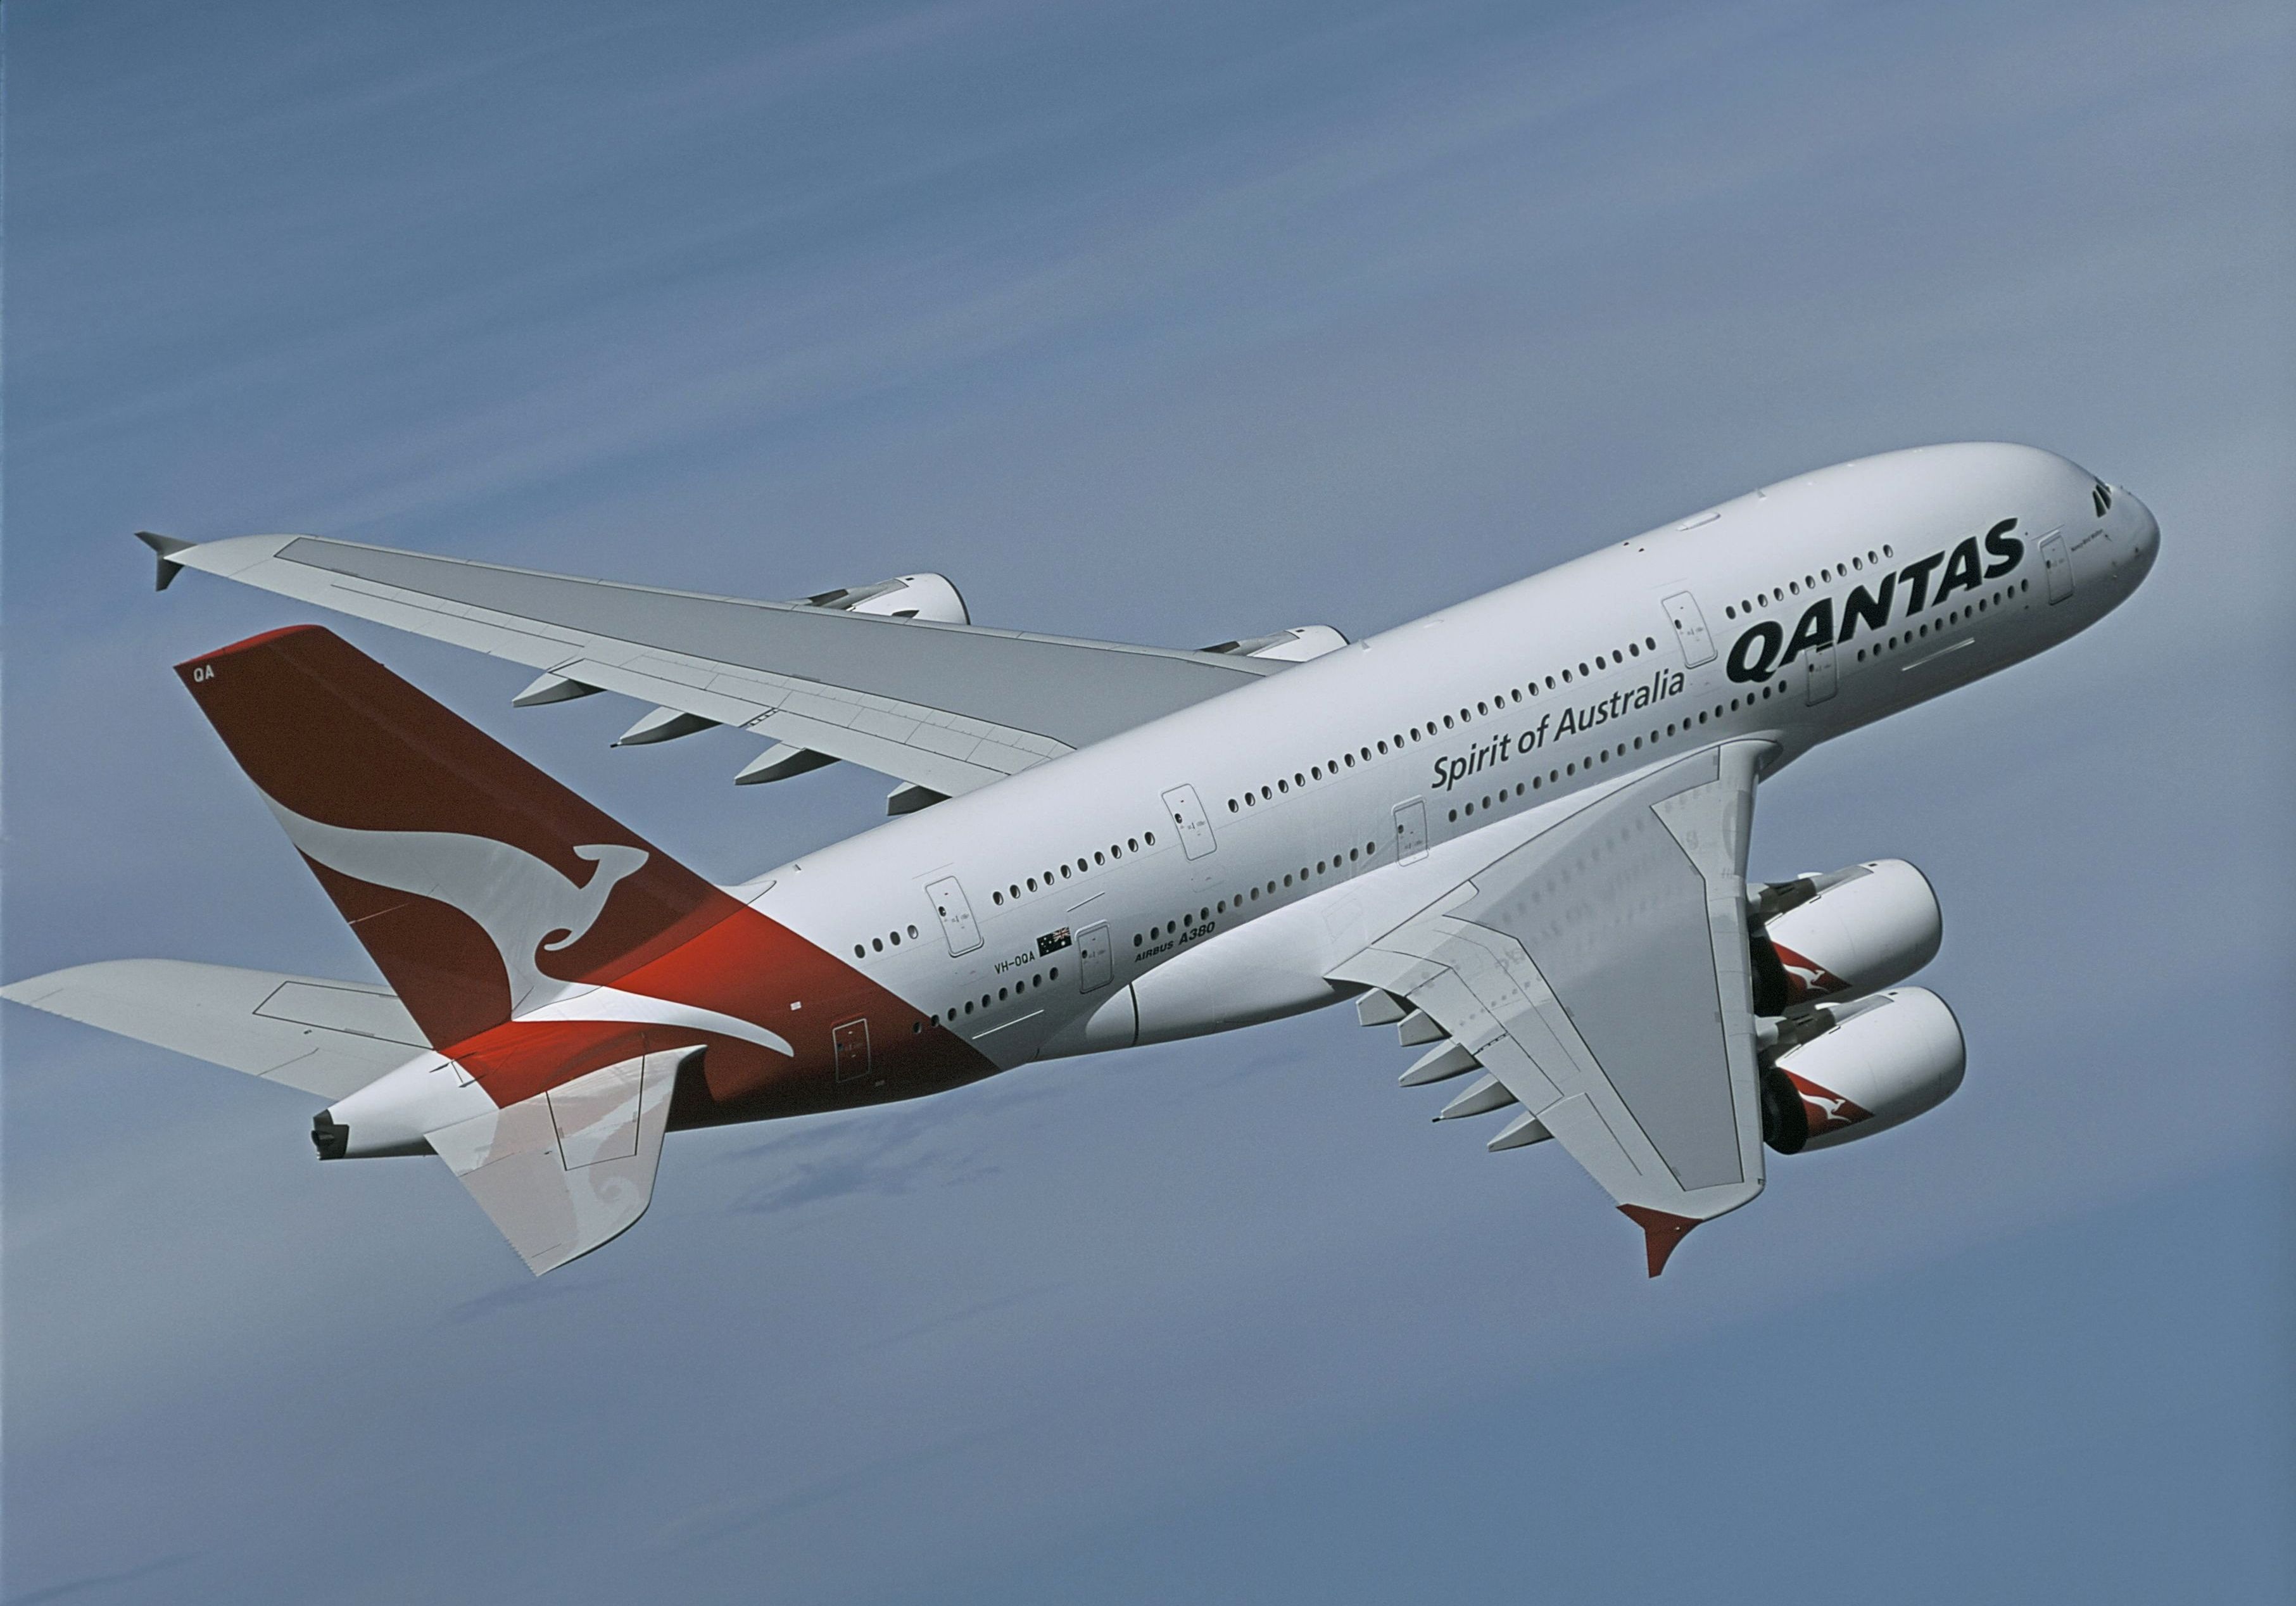 Qantas has returned seven of its Airbus A380s into service